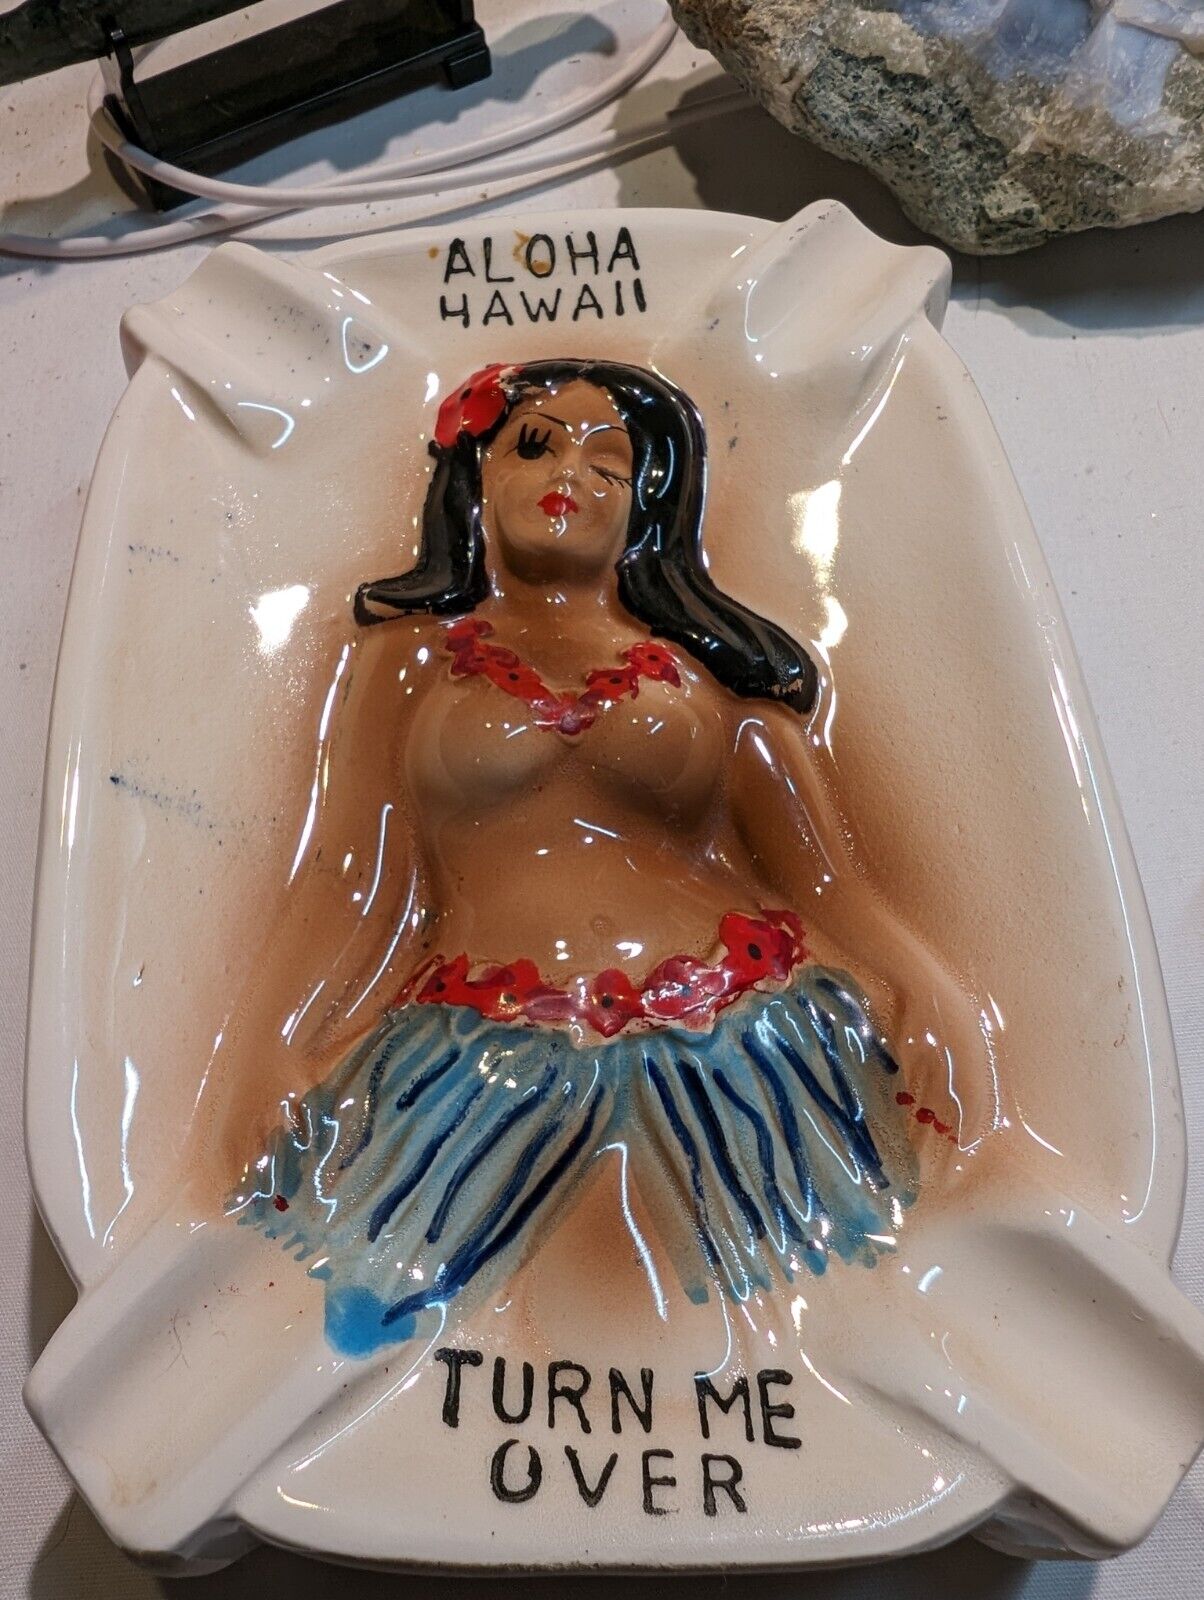 50's Vintage Ceramic Ashtray Turn Me Over Double Sided Risqué Woman Hawaii Hula